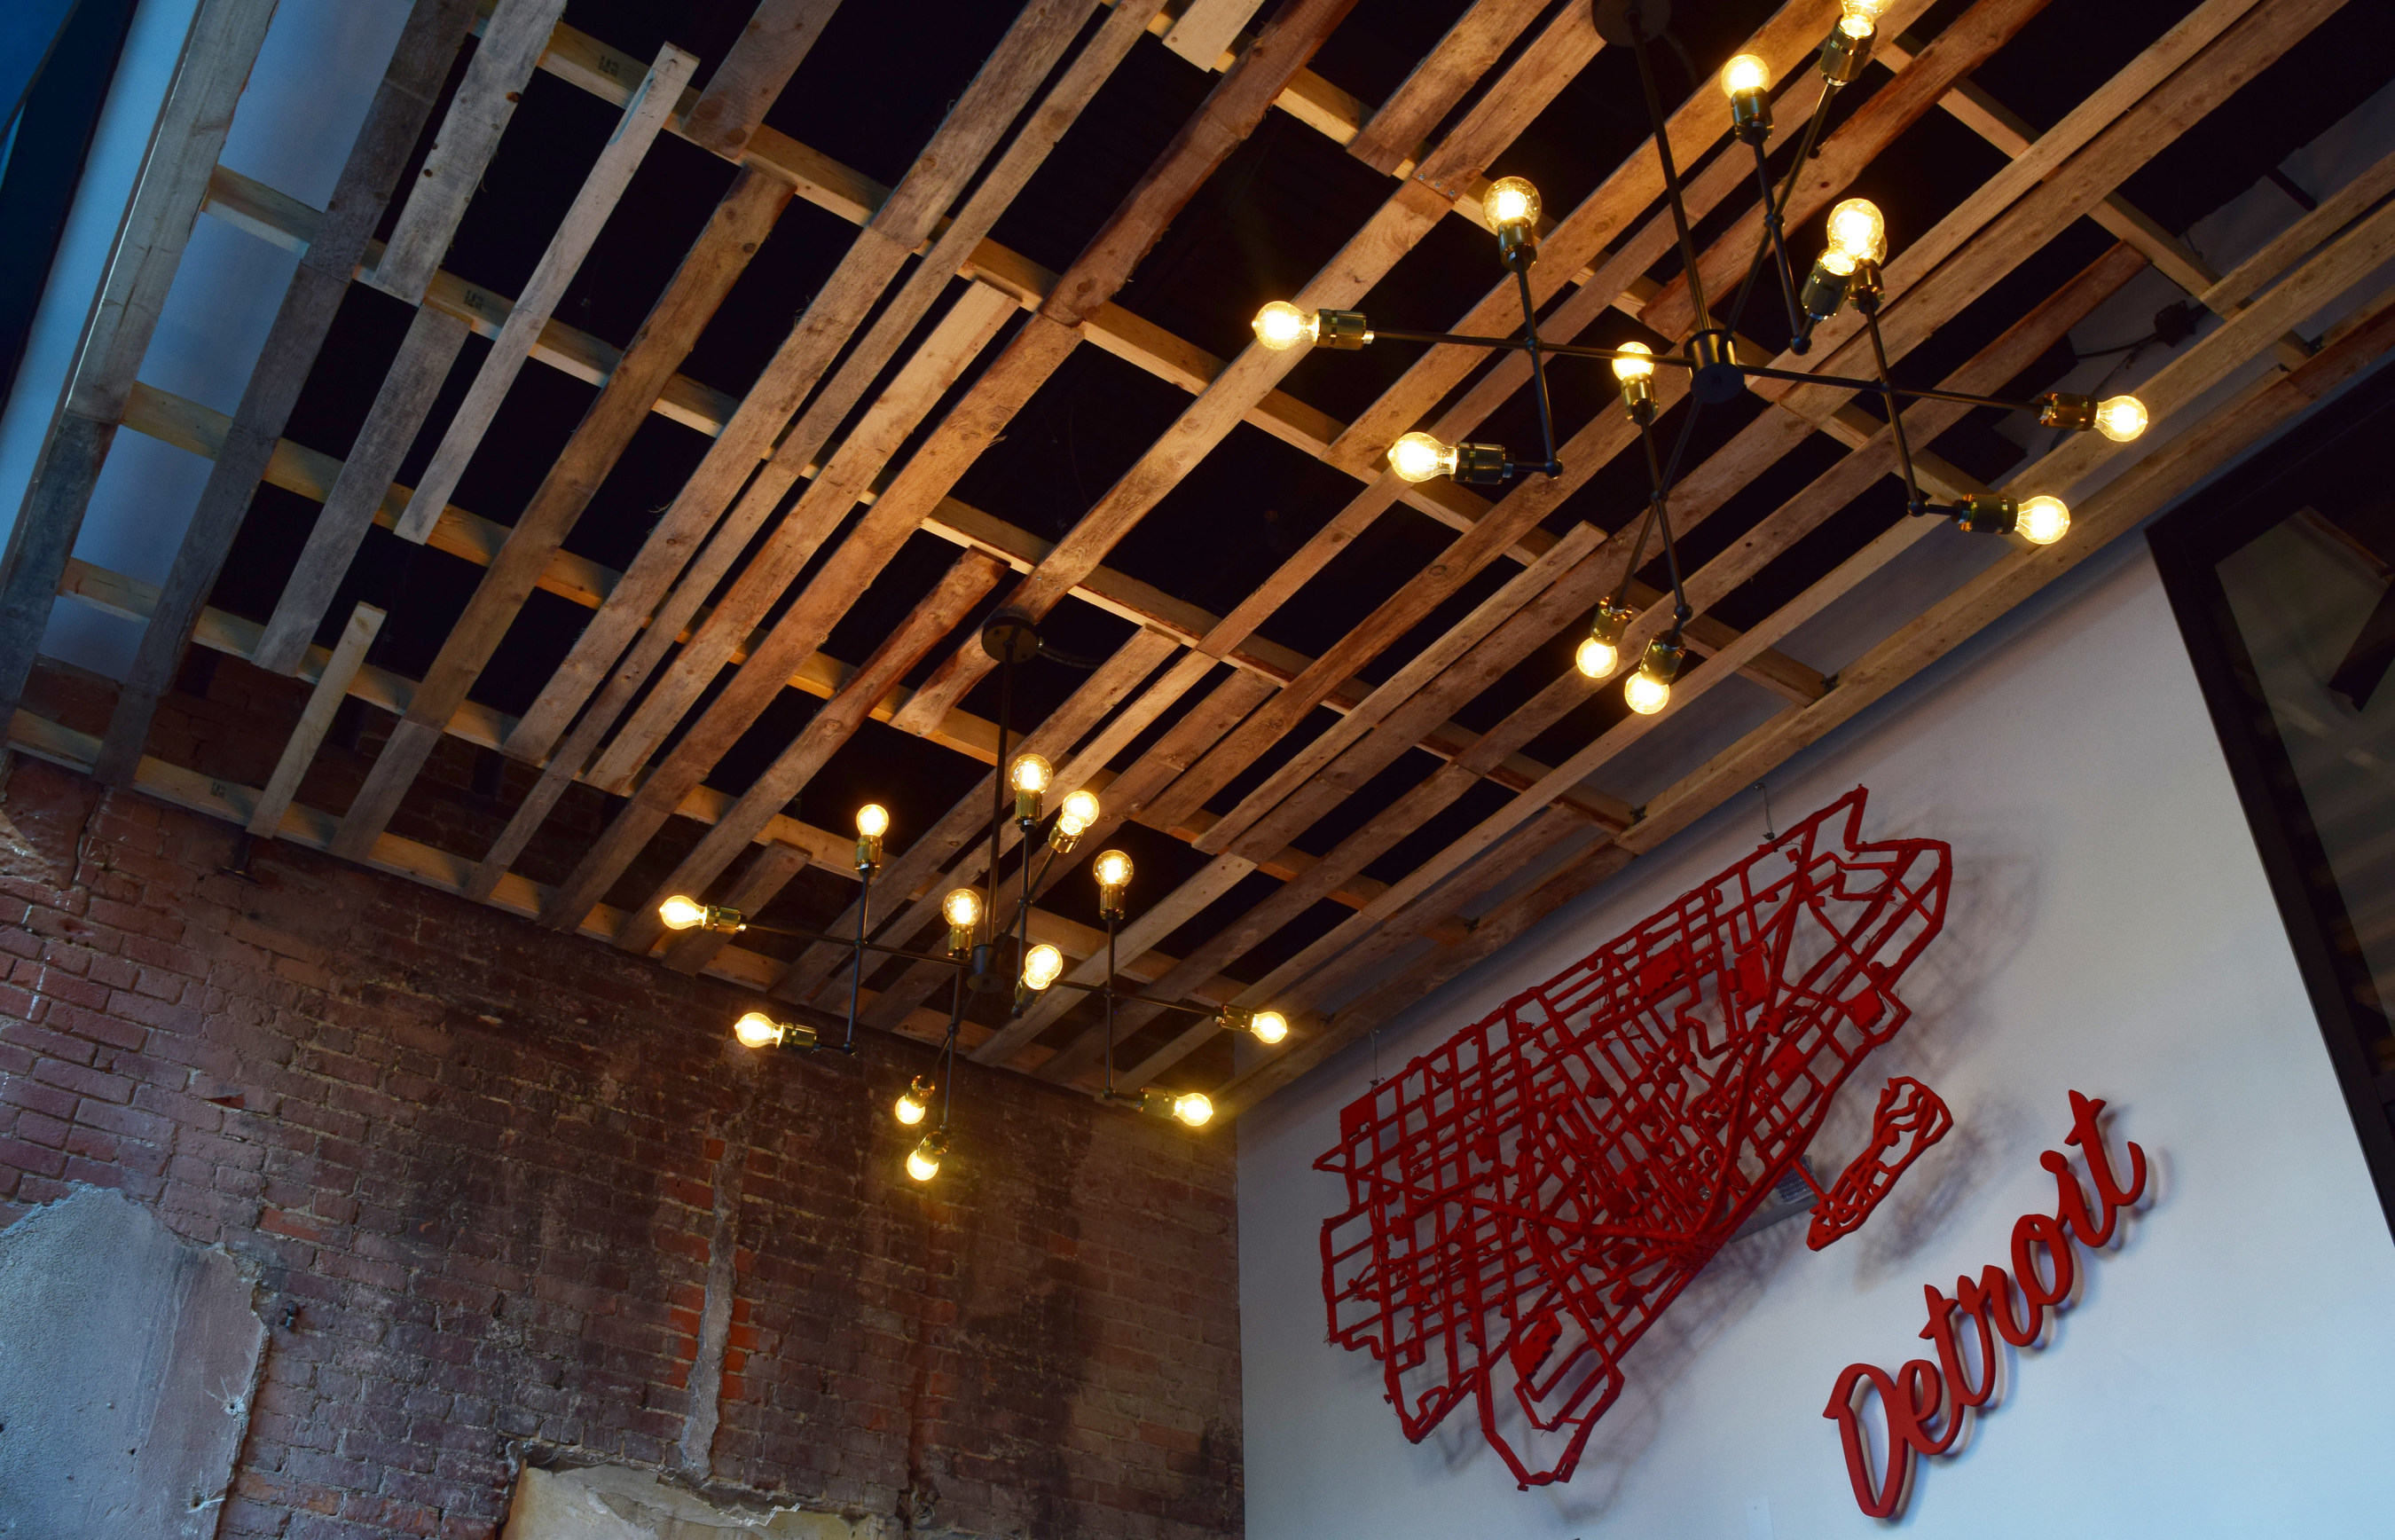 Lear Innovation Center entrance ceiling is made from recycled wood pallets